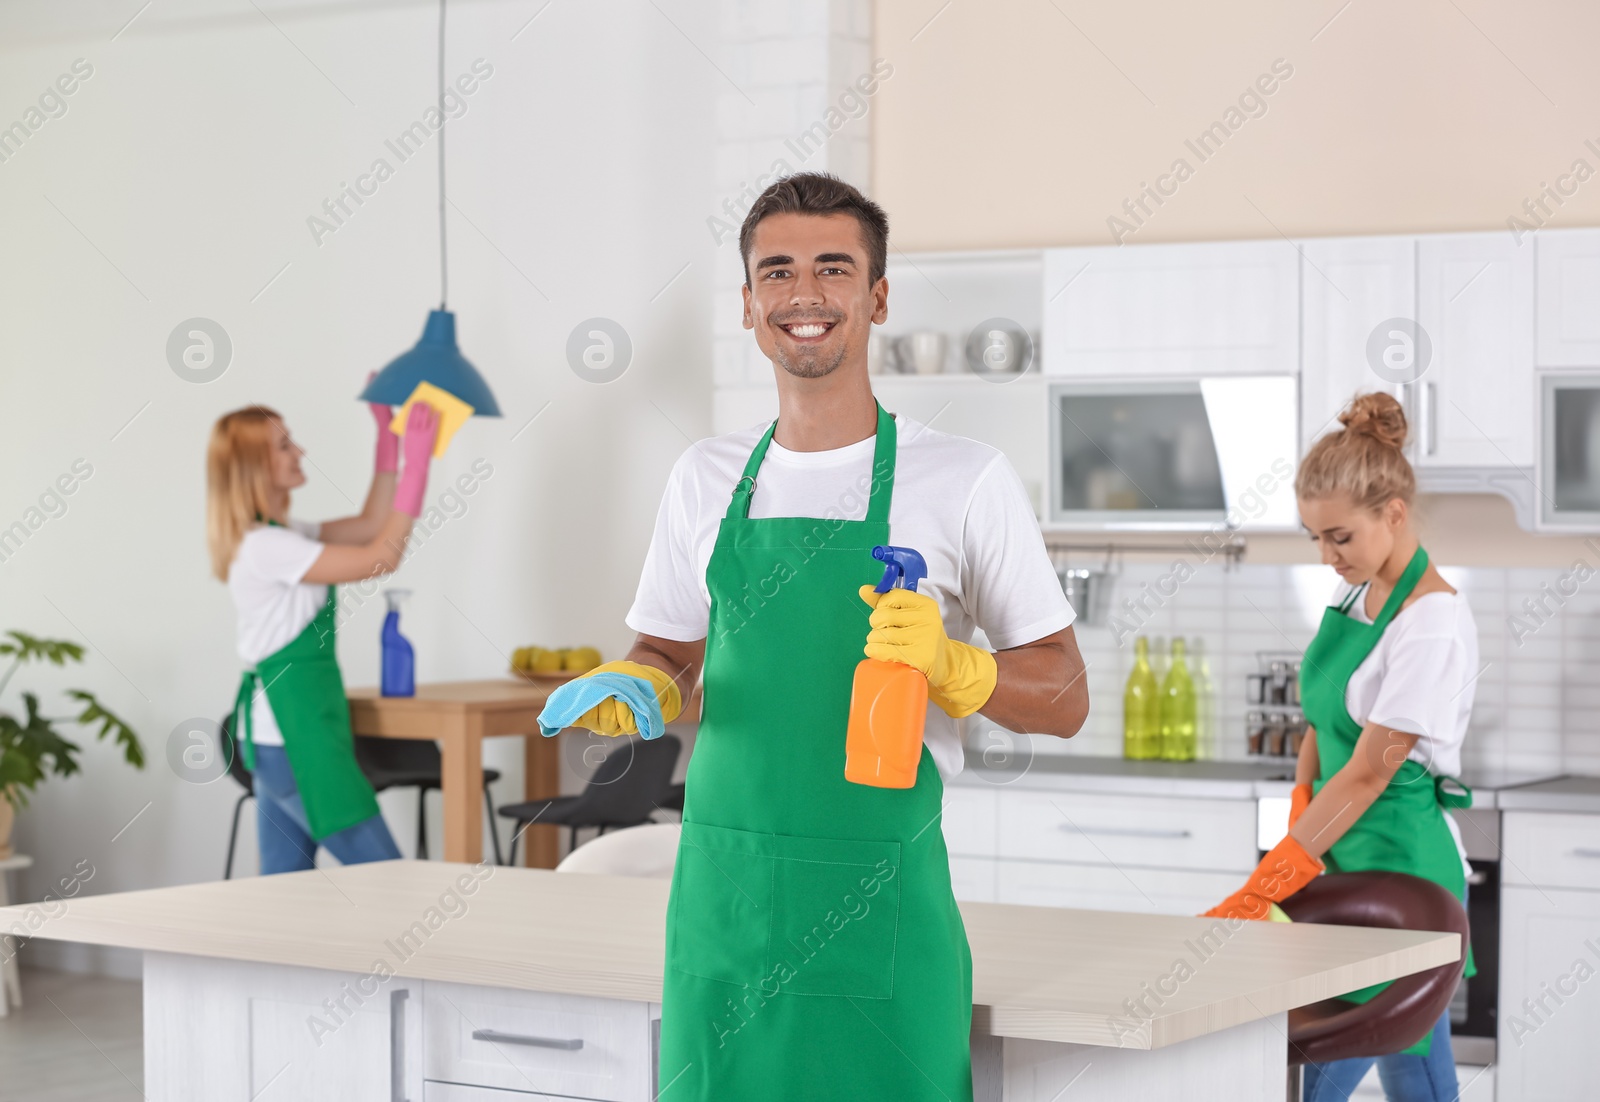 Photo of Team of professional janitors in uniform cleaning kitchen